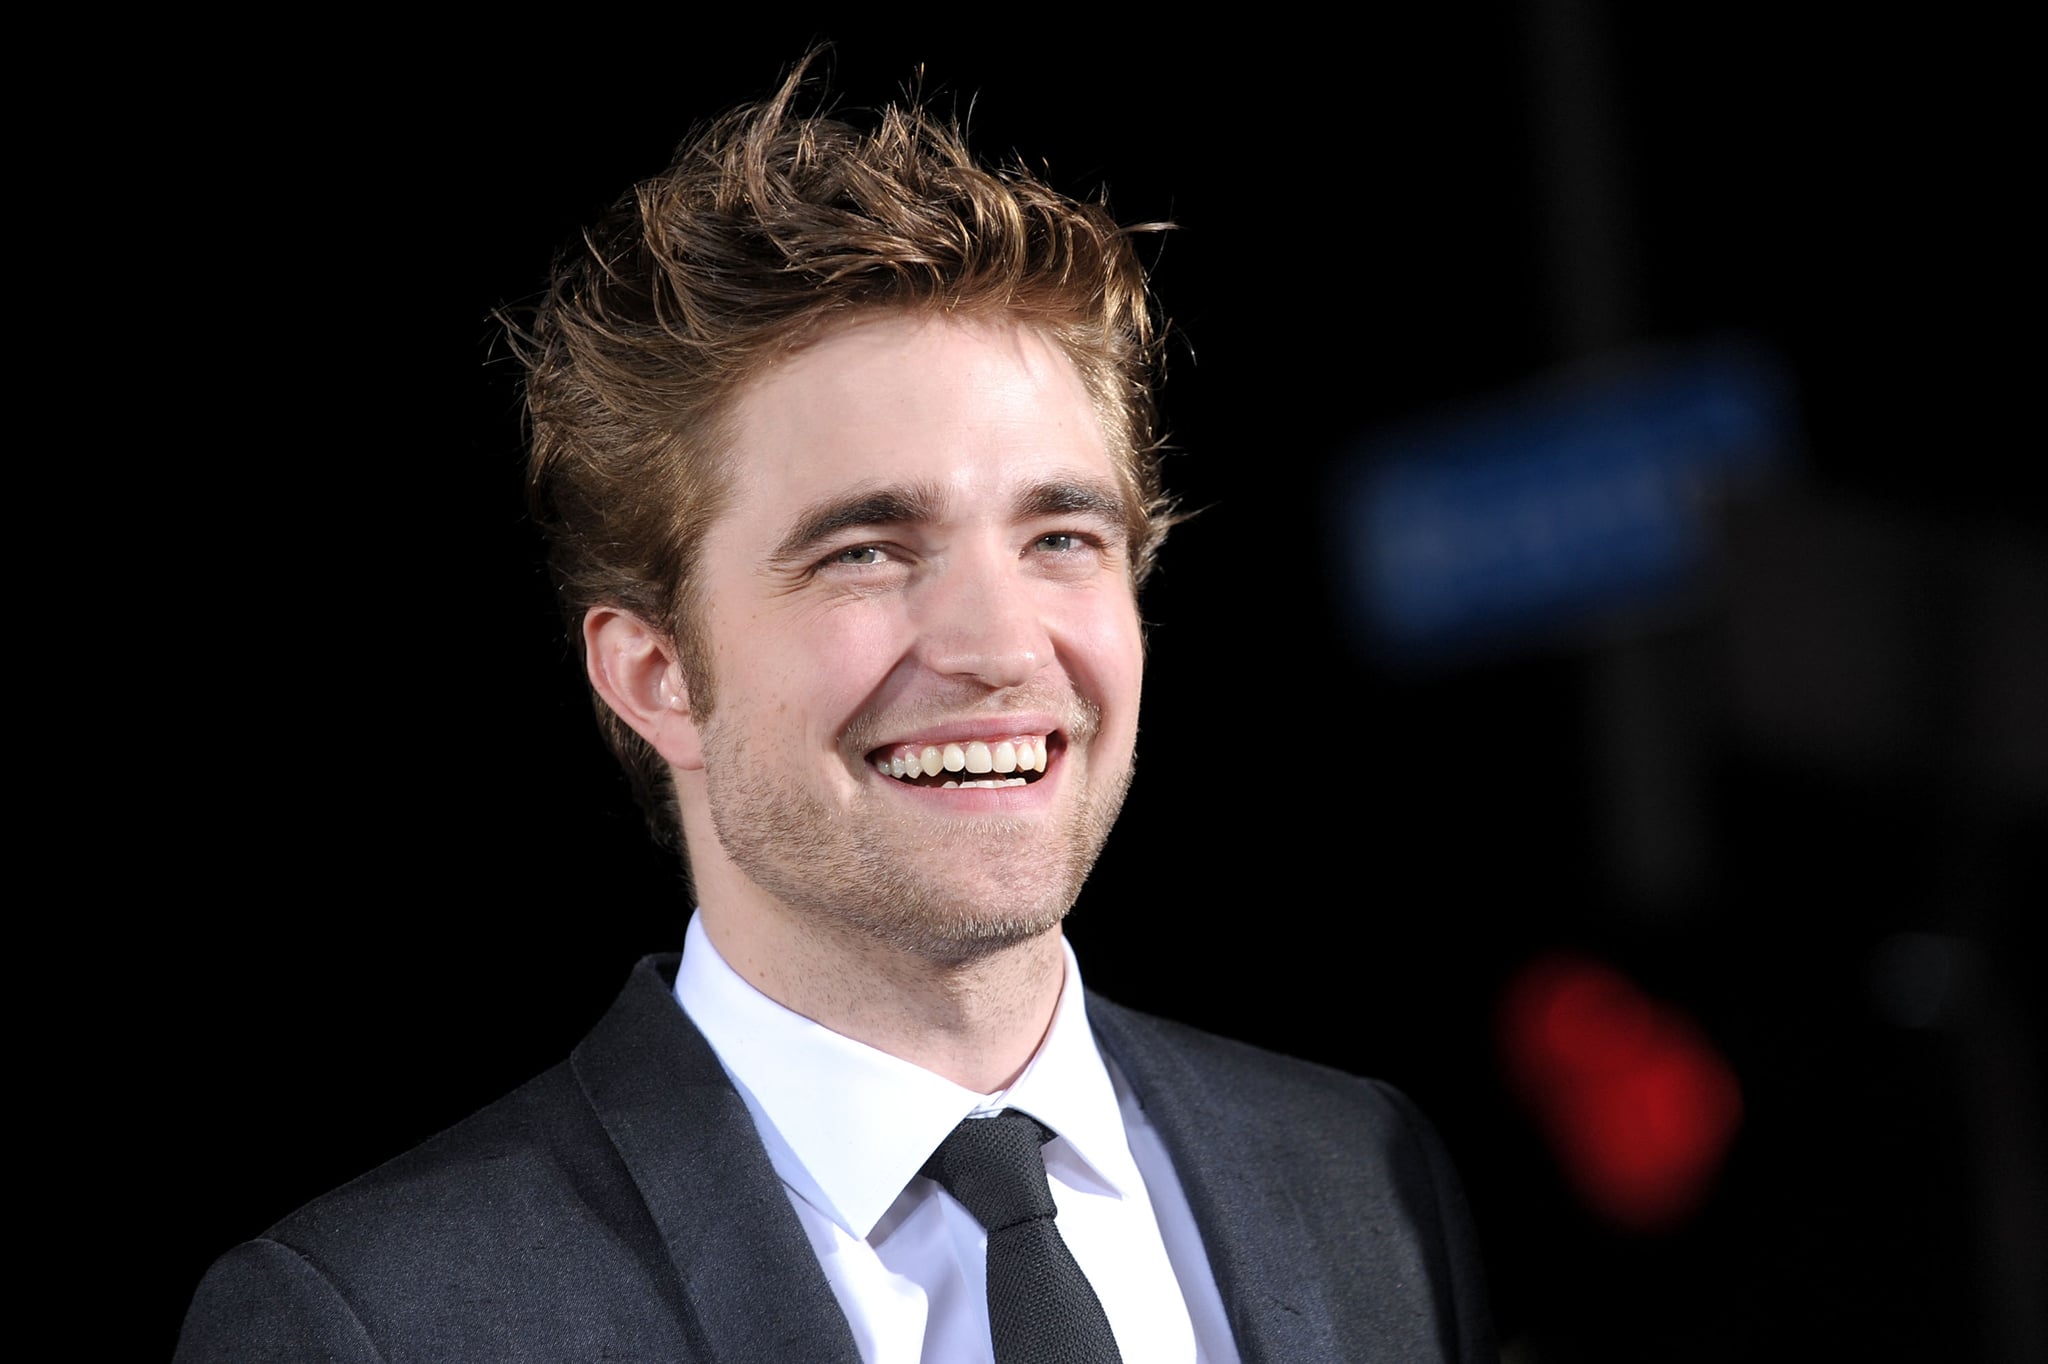 Robert Pattinson a British actor renowned in the role of Edward Cullen in T...